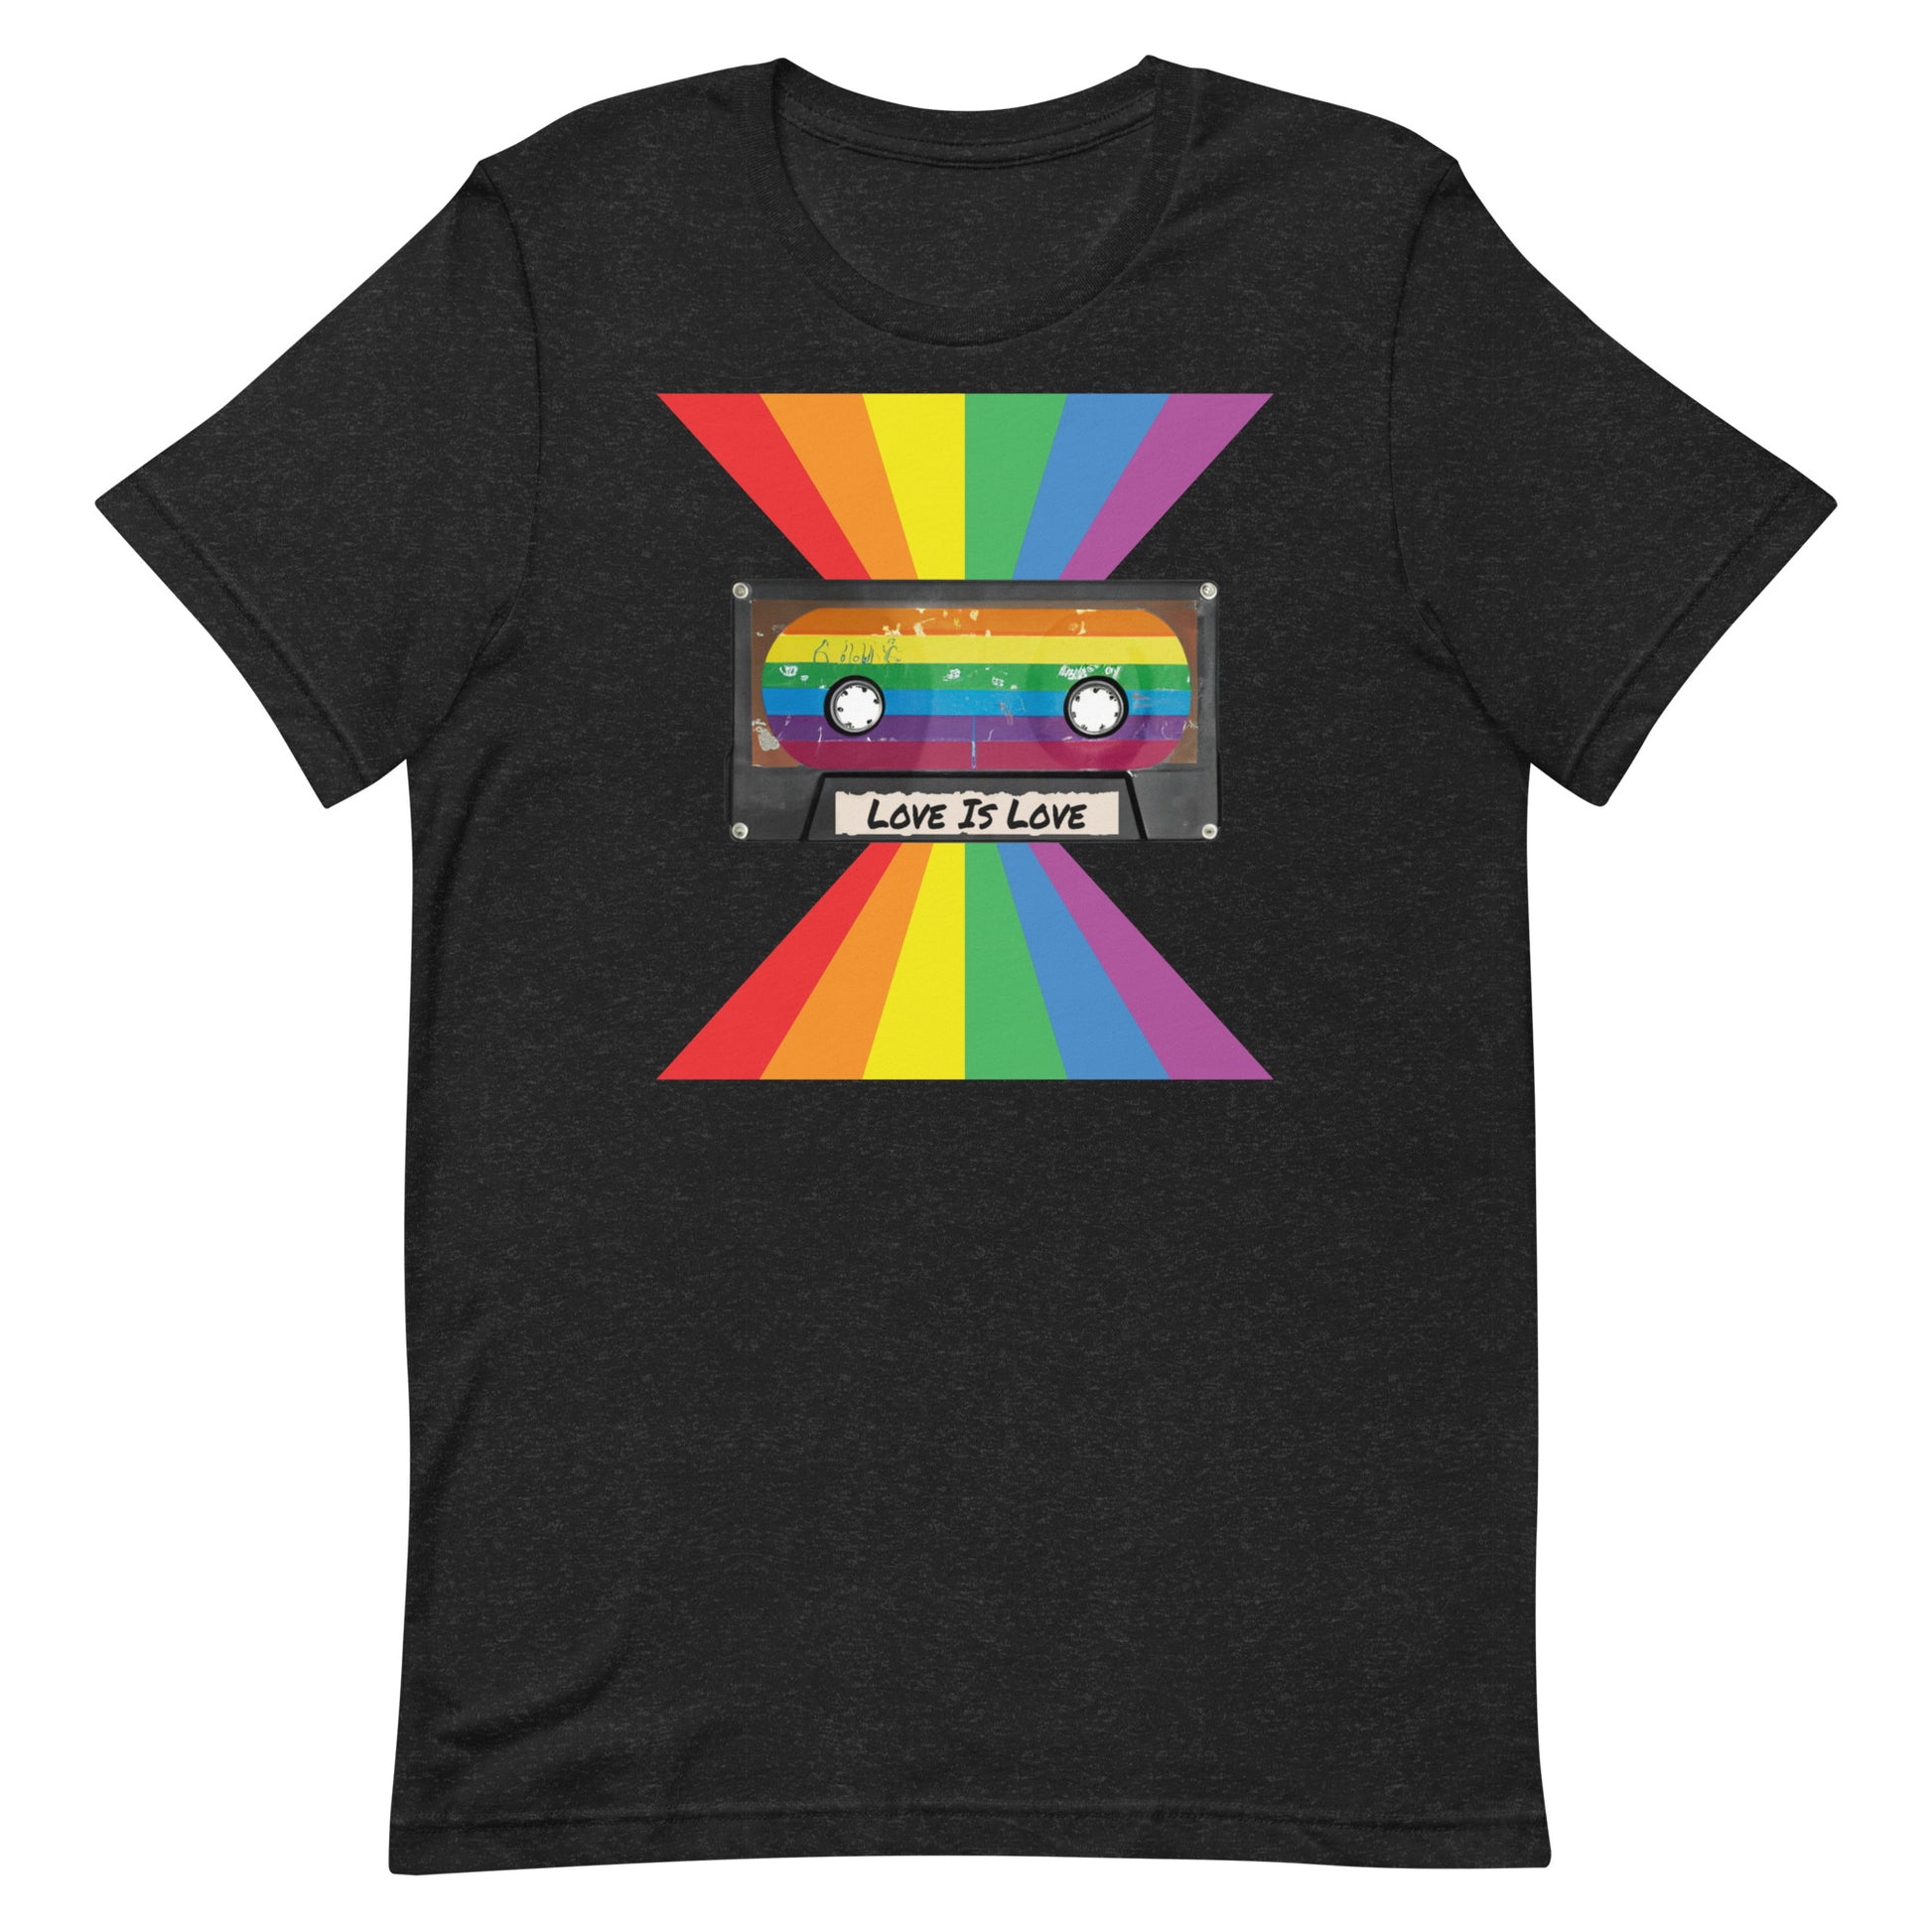 Love is Love Gay Pride t-shirt - Rose Gold Co. Shop